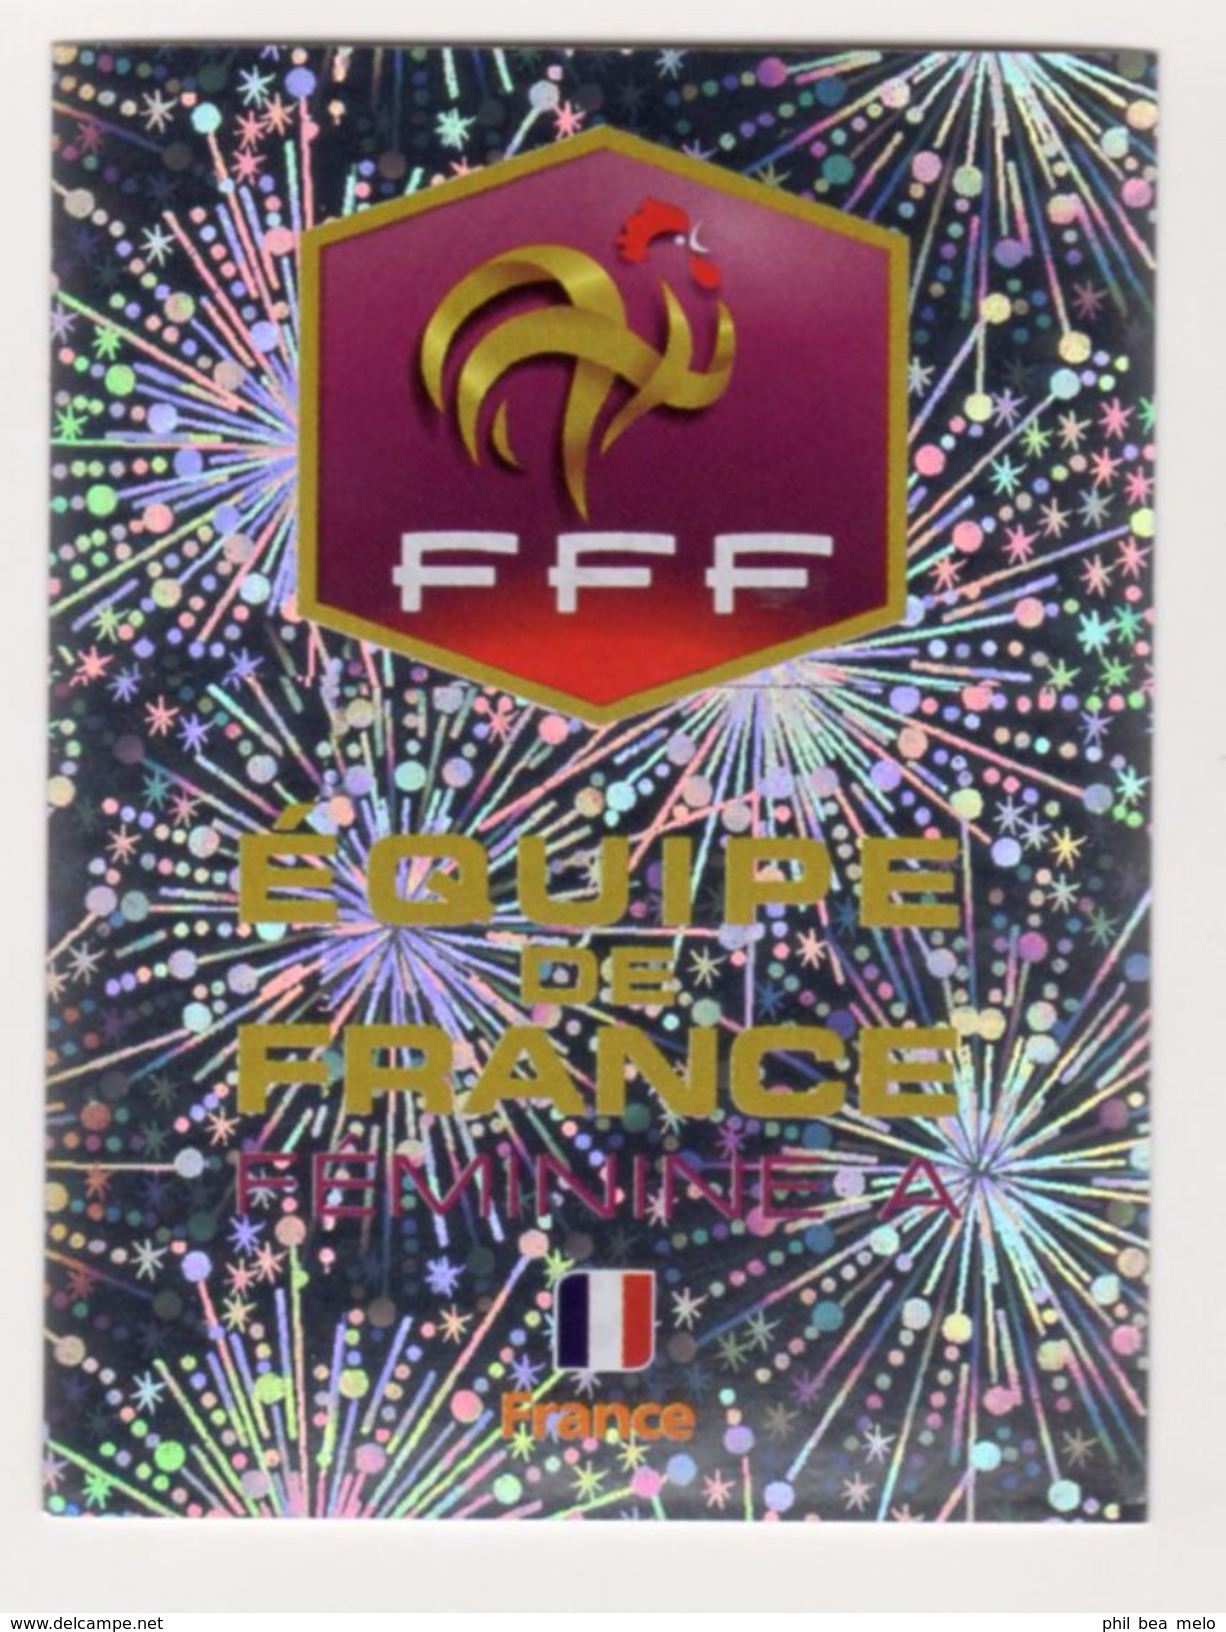 FOOT STICKERS PANINI FIFA WOMEN WORLD CUP 2011 GERMANY - EQUIPE DE FRANCE - LOT 17 STICKERS NEUFS - VOIR DESCRIPTION - French Edition